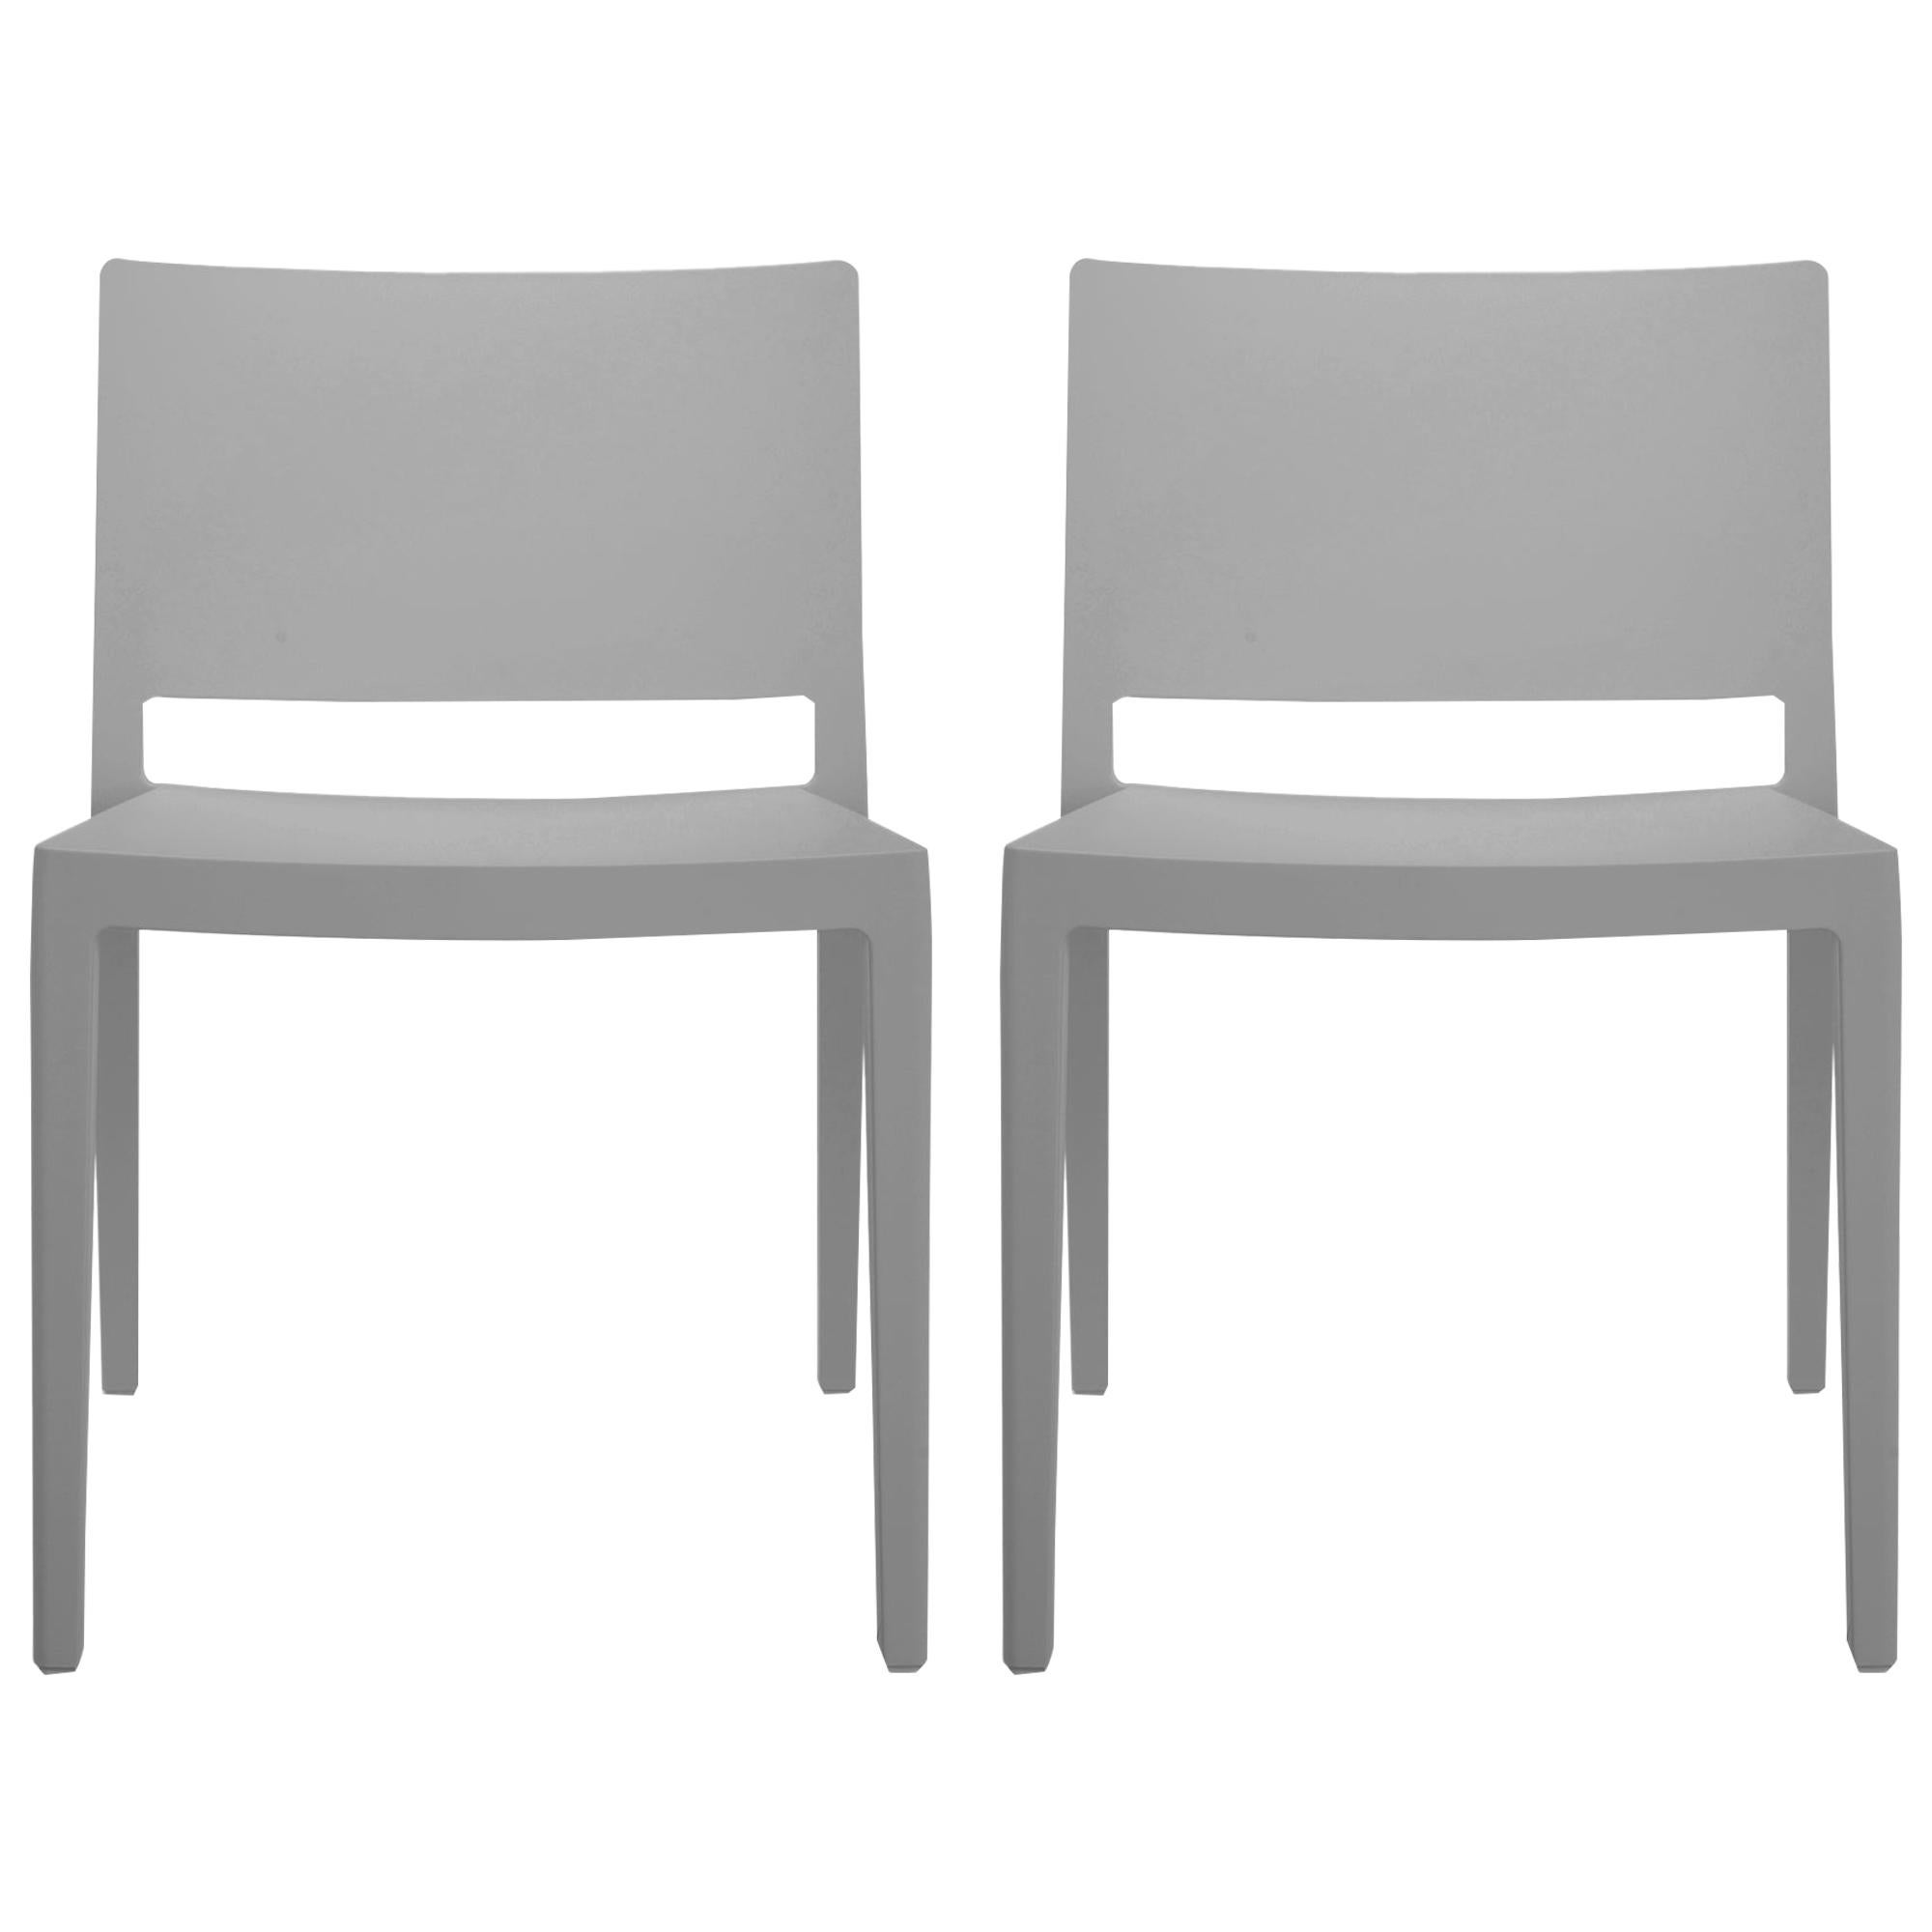 Set of 2 Kartell Lizz Mat Chairs in Grey by Patricia Urquiola